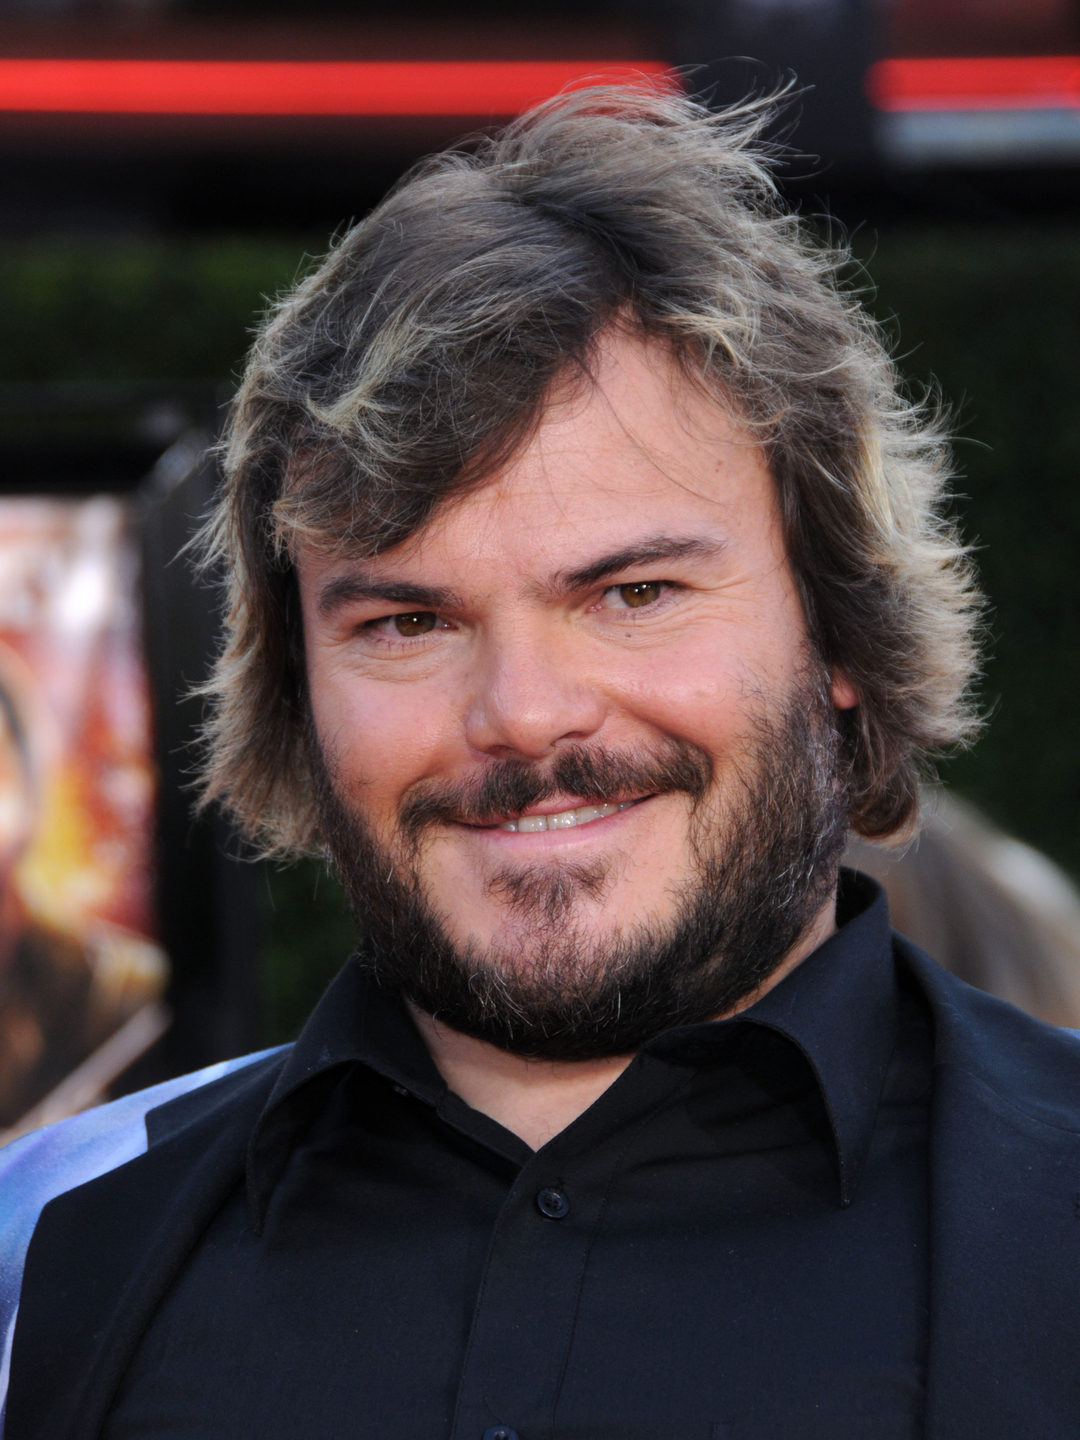 Jack Black who are his parents